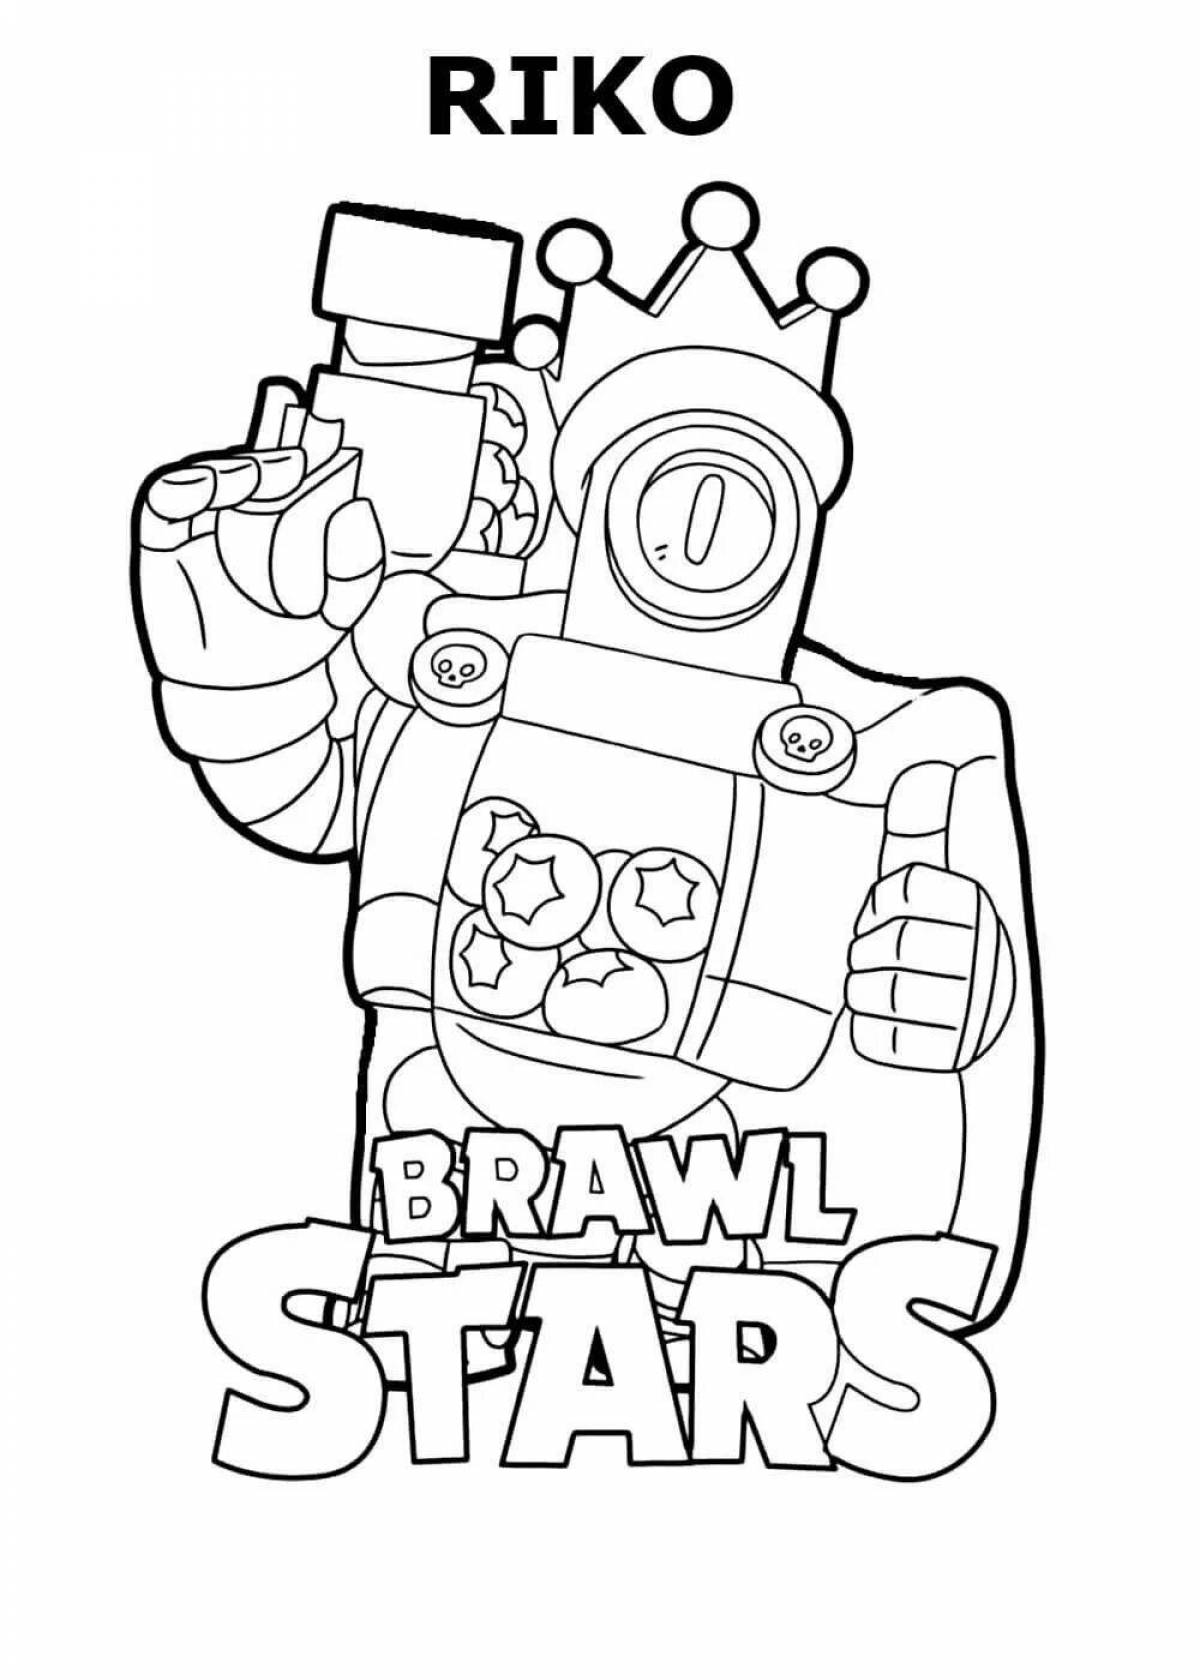 Brawl stars live coloring for boys